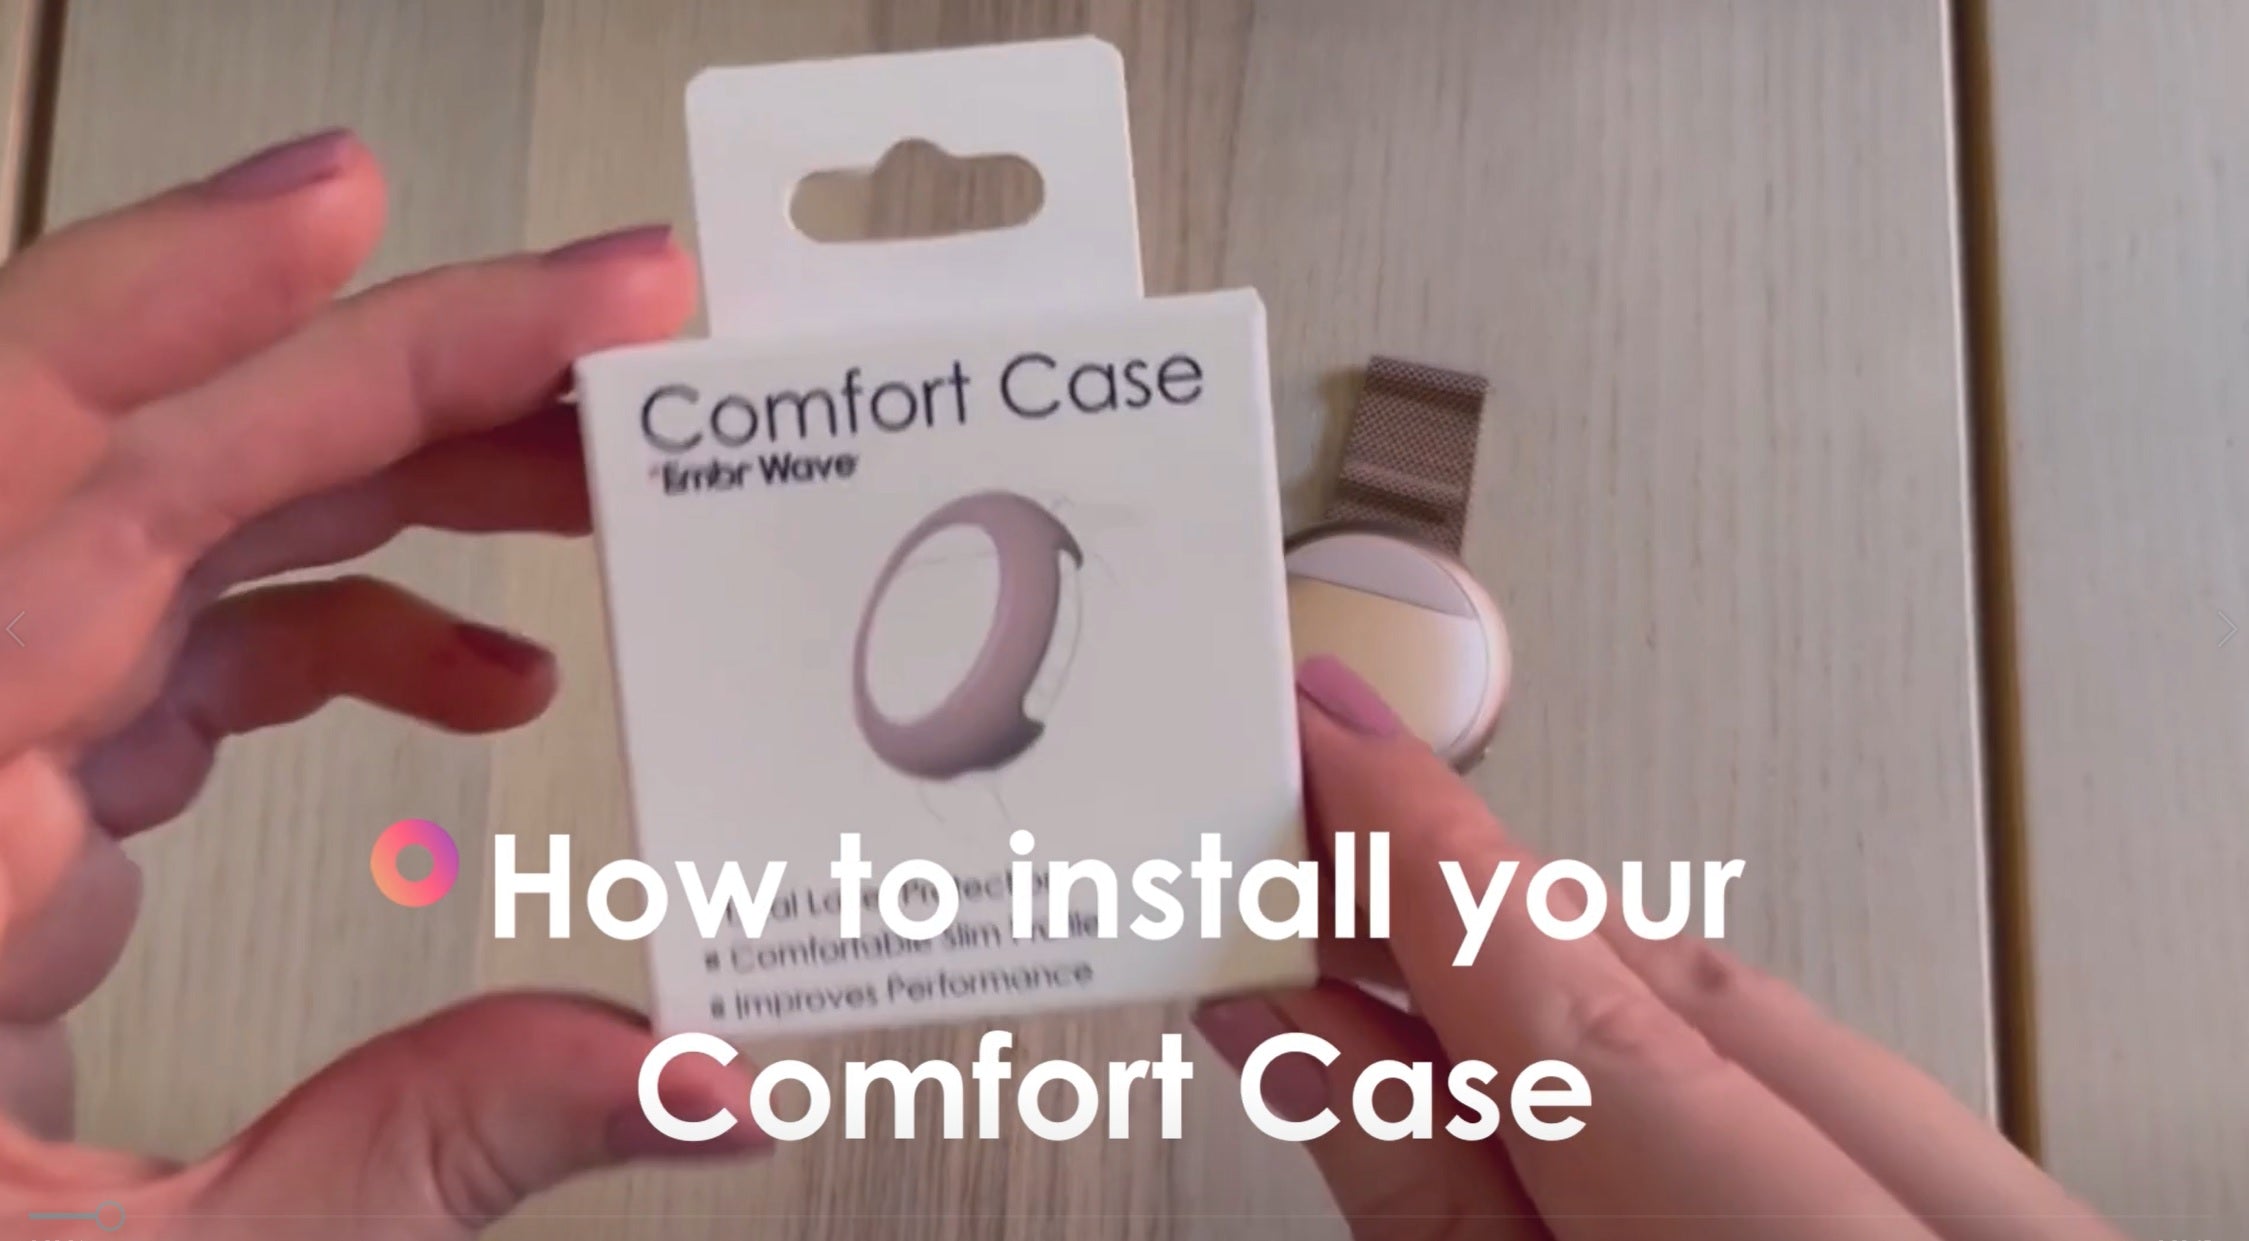 Thumbnail image showing title "How to install your Comfort Case" showing overhead view of hands holding a box for an Embr Wave Comfort Case